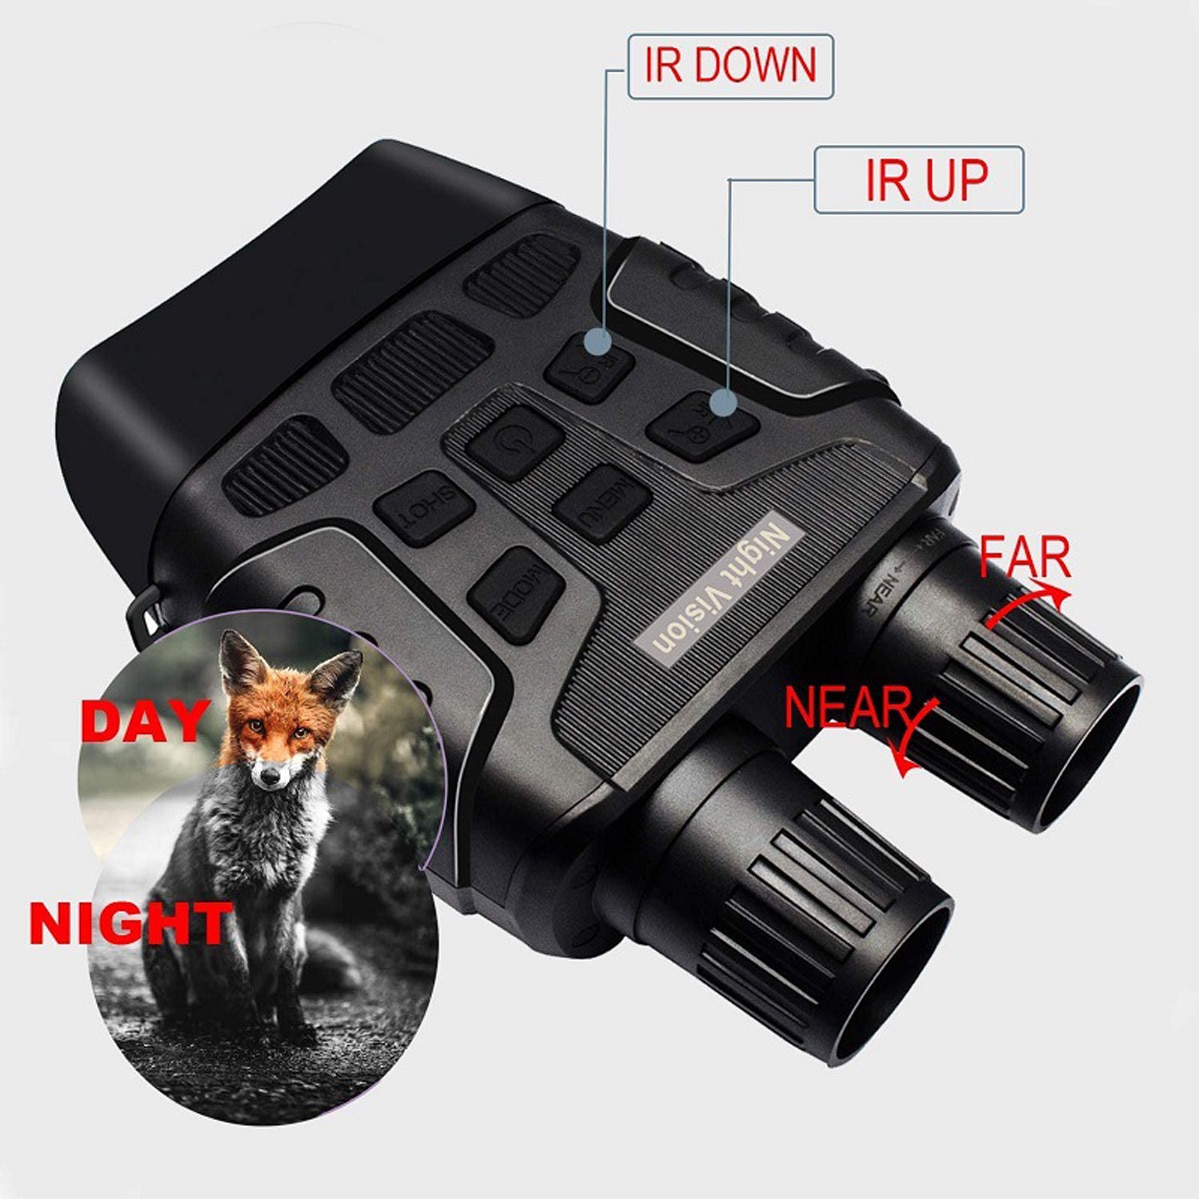 Professional Infrared Night Vision Binoculars Digital Camera Military Hunting IR Telescopes For Night Fishing With 2.31'' LCD